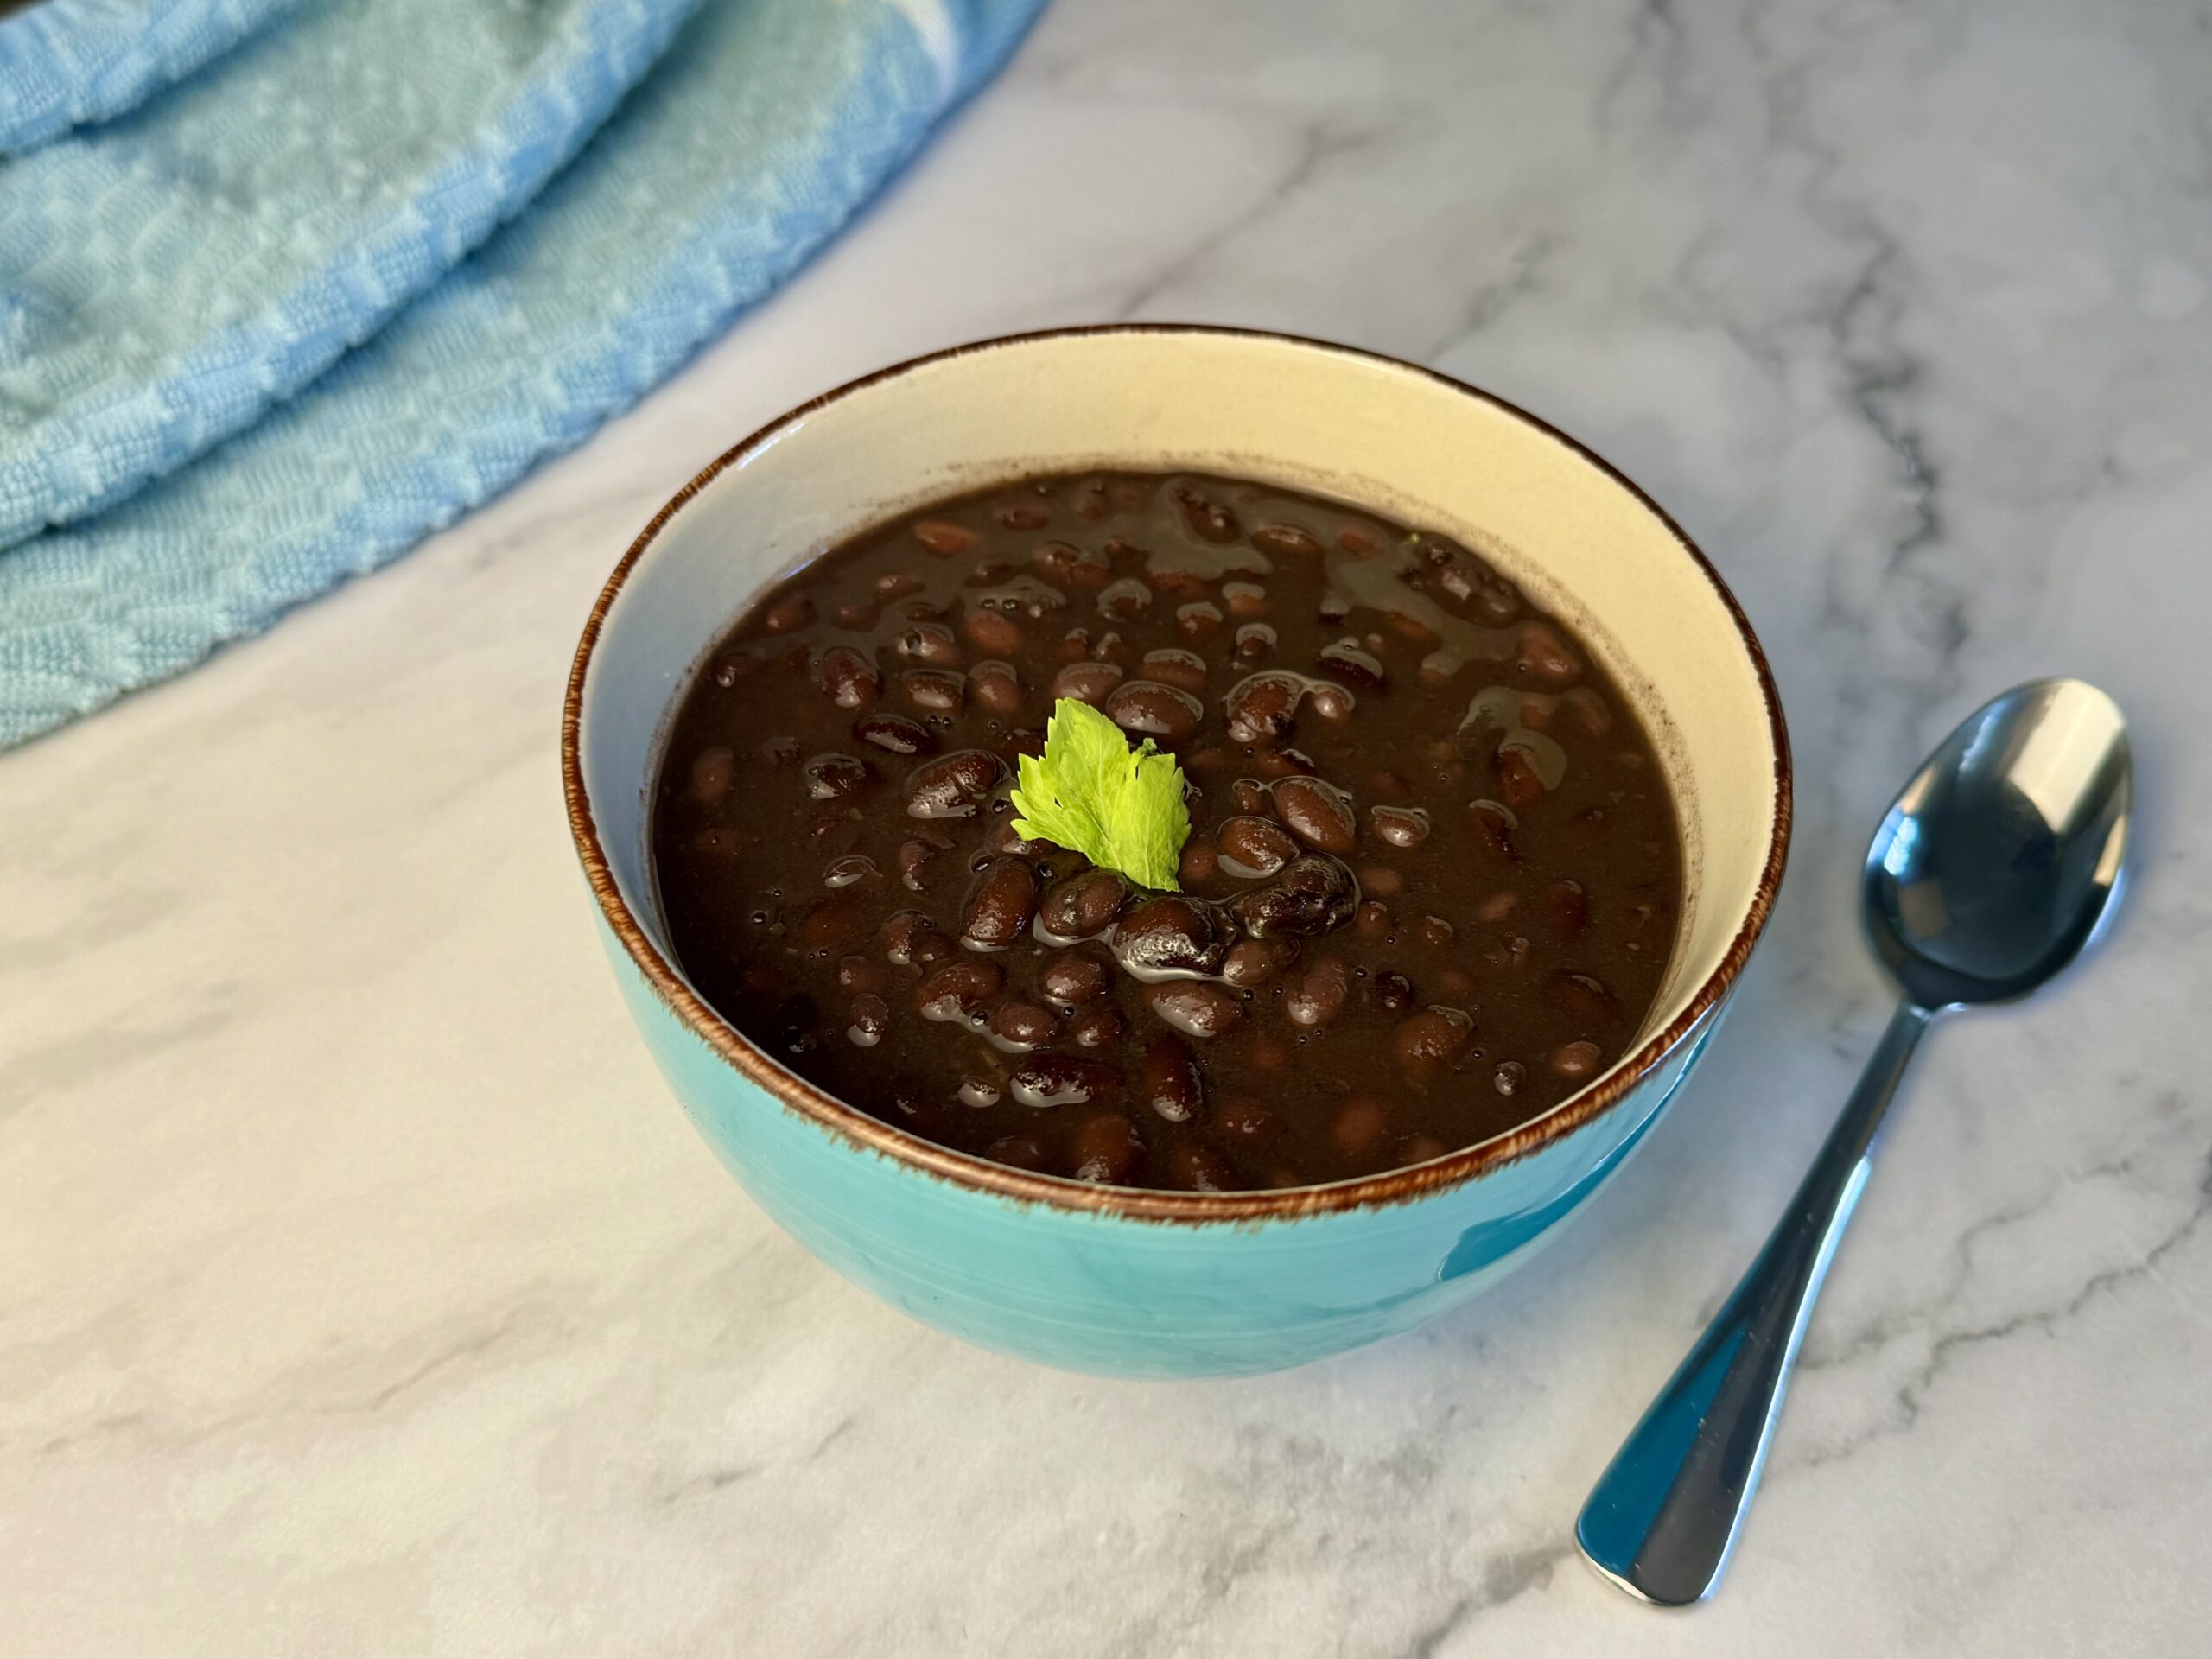 Black Beans with celery leaf garnish in a vibrant blue bowl on white marbled stone counter top. Spoon and dish towel elegantly placed alongside in the background.